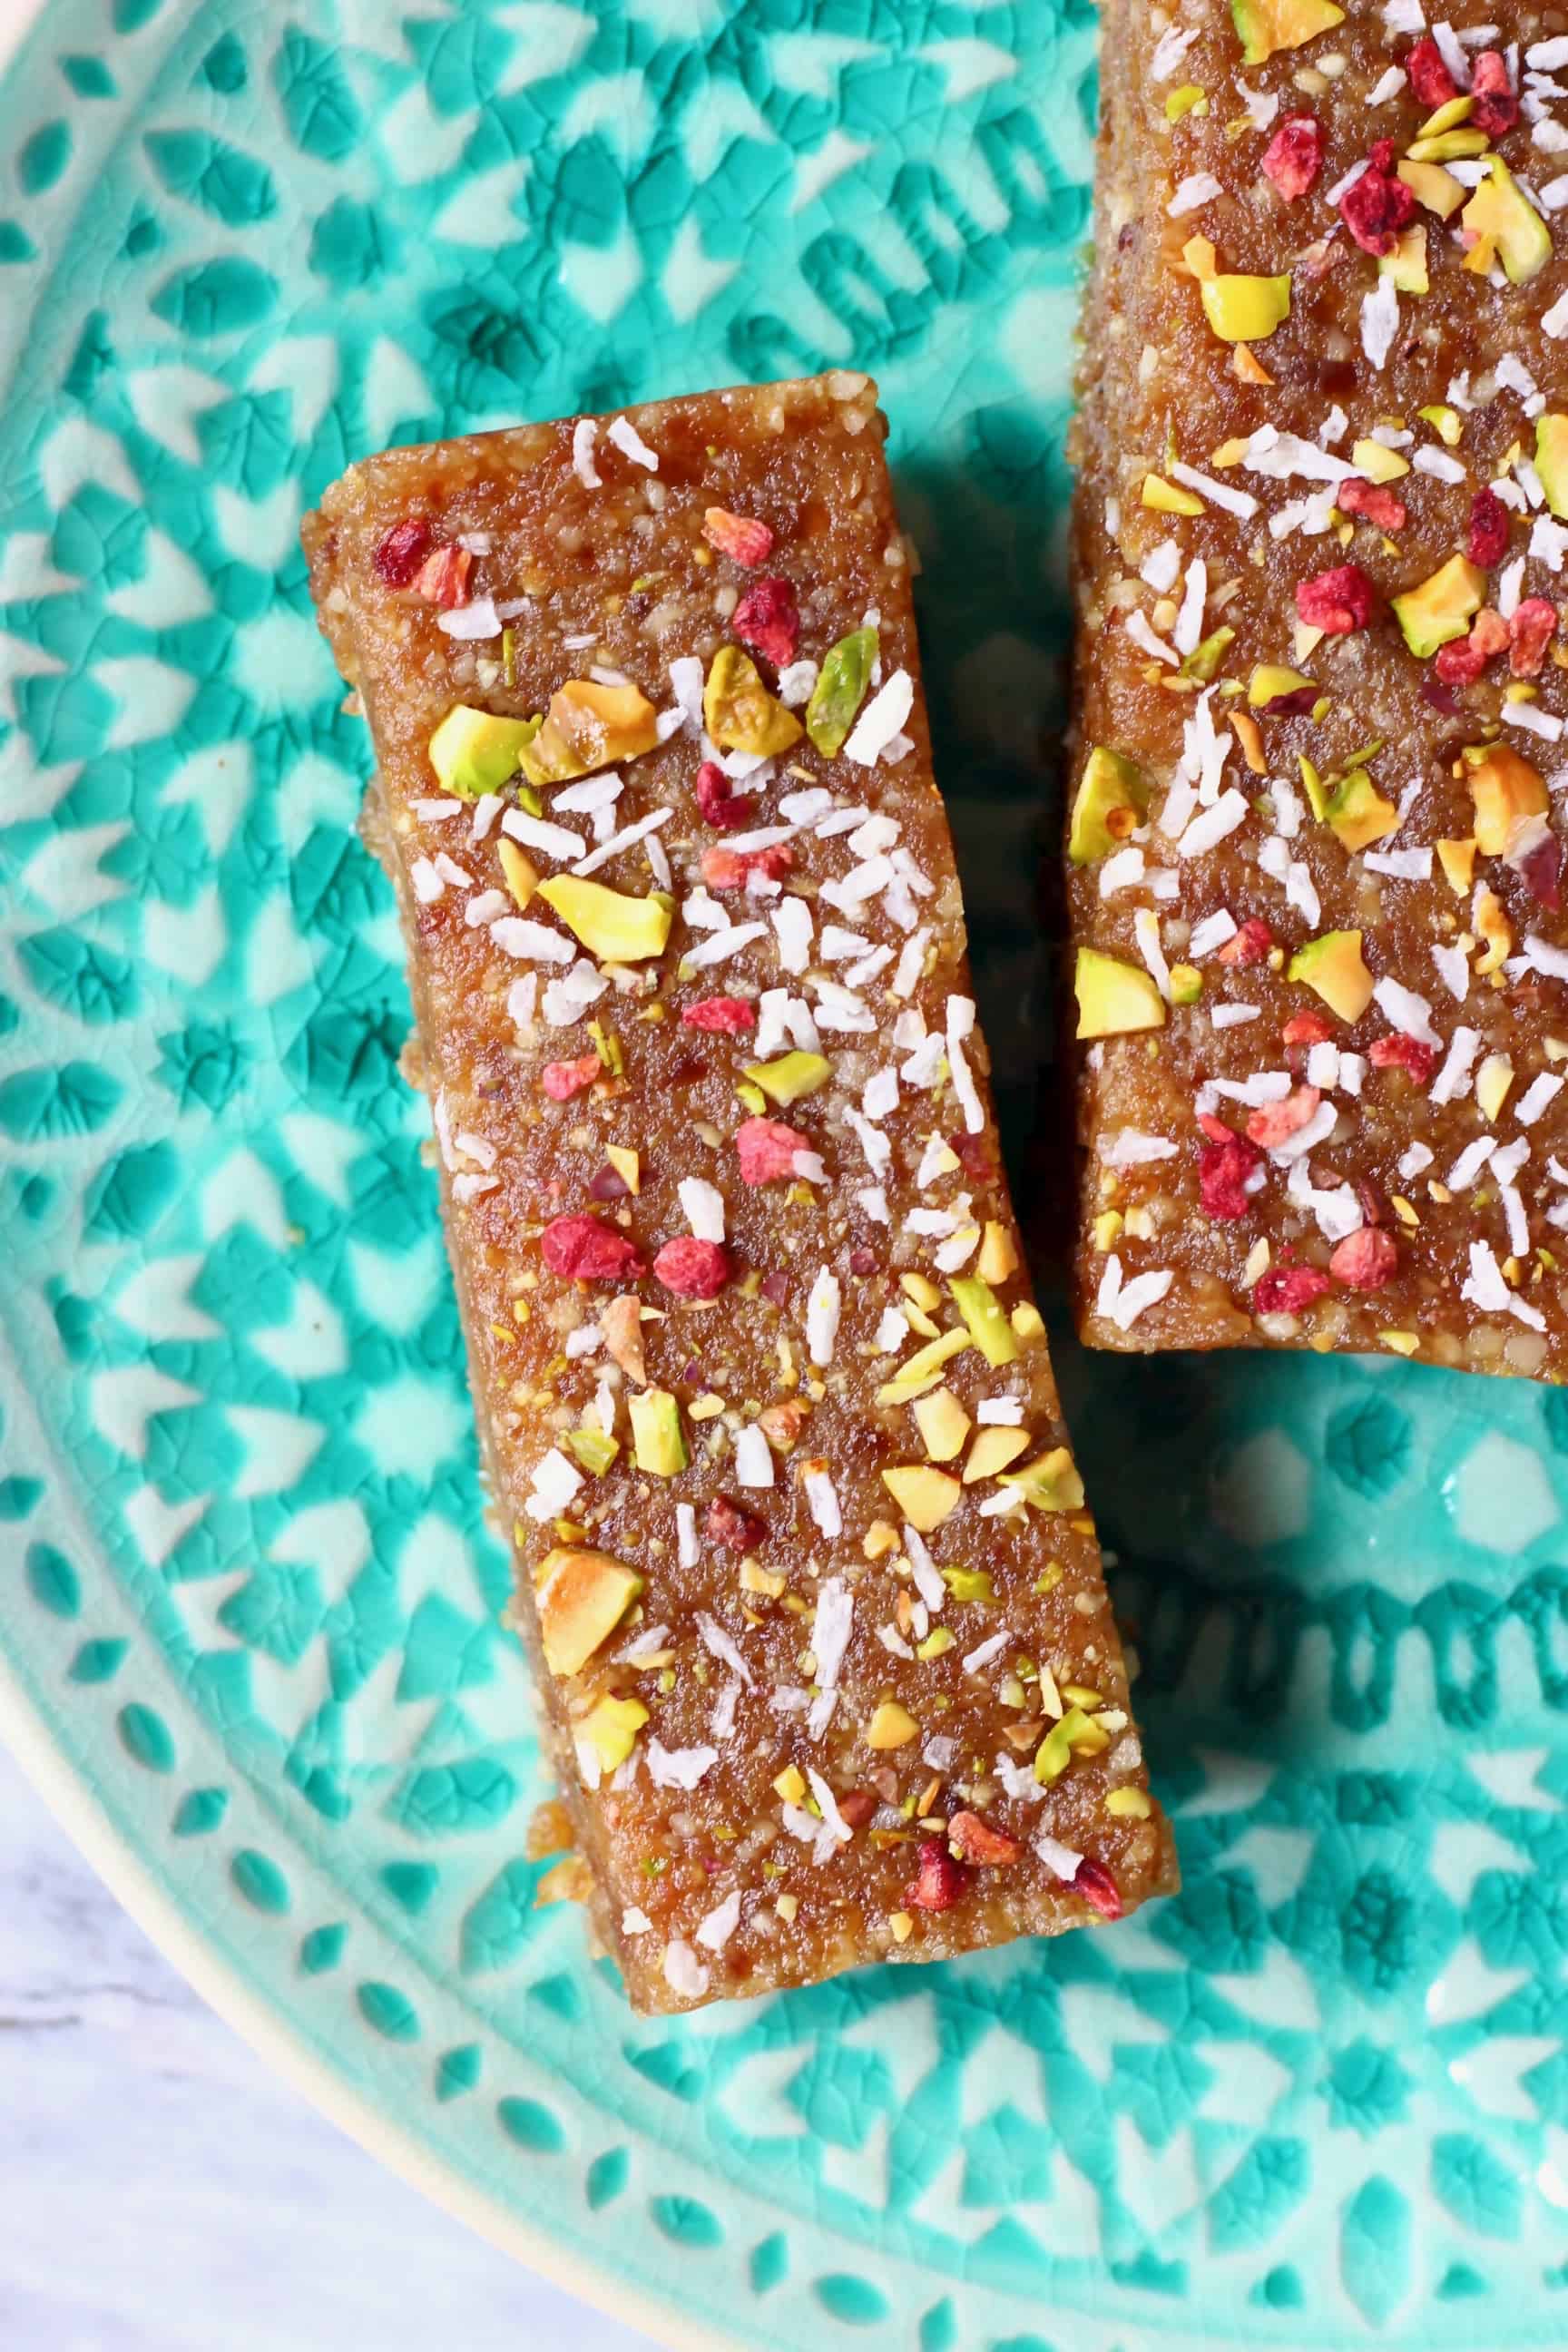 Two brown energy bars sprinkled with chopped pistachio nuts, desiccated coconut and freeze-dried raspberries on a plate